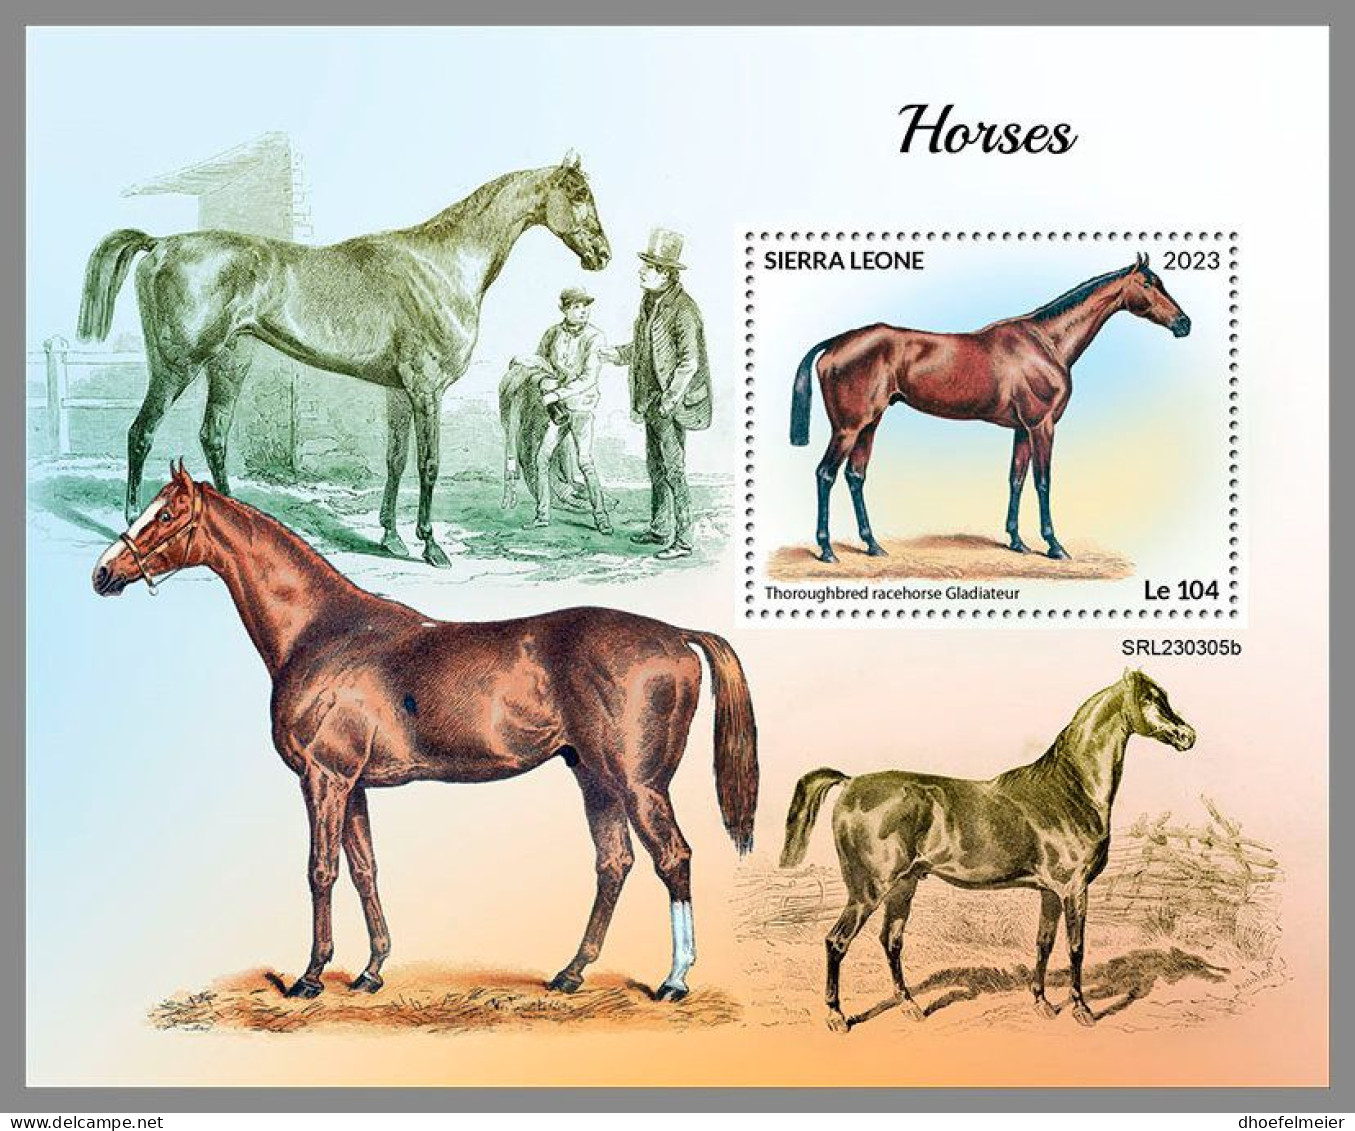 SIERRA LEONE 2023 MNH Horses Pferde S/S – OFFICIAL ISSUE – DHQ2418 - Horses